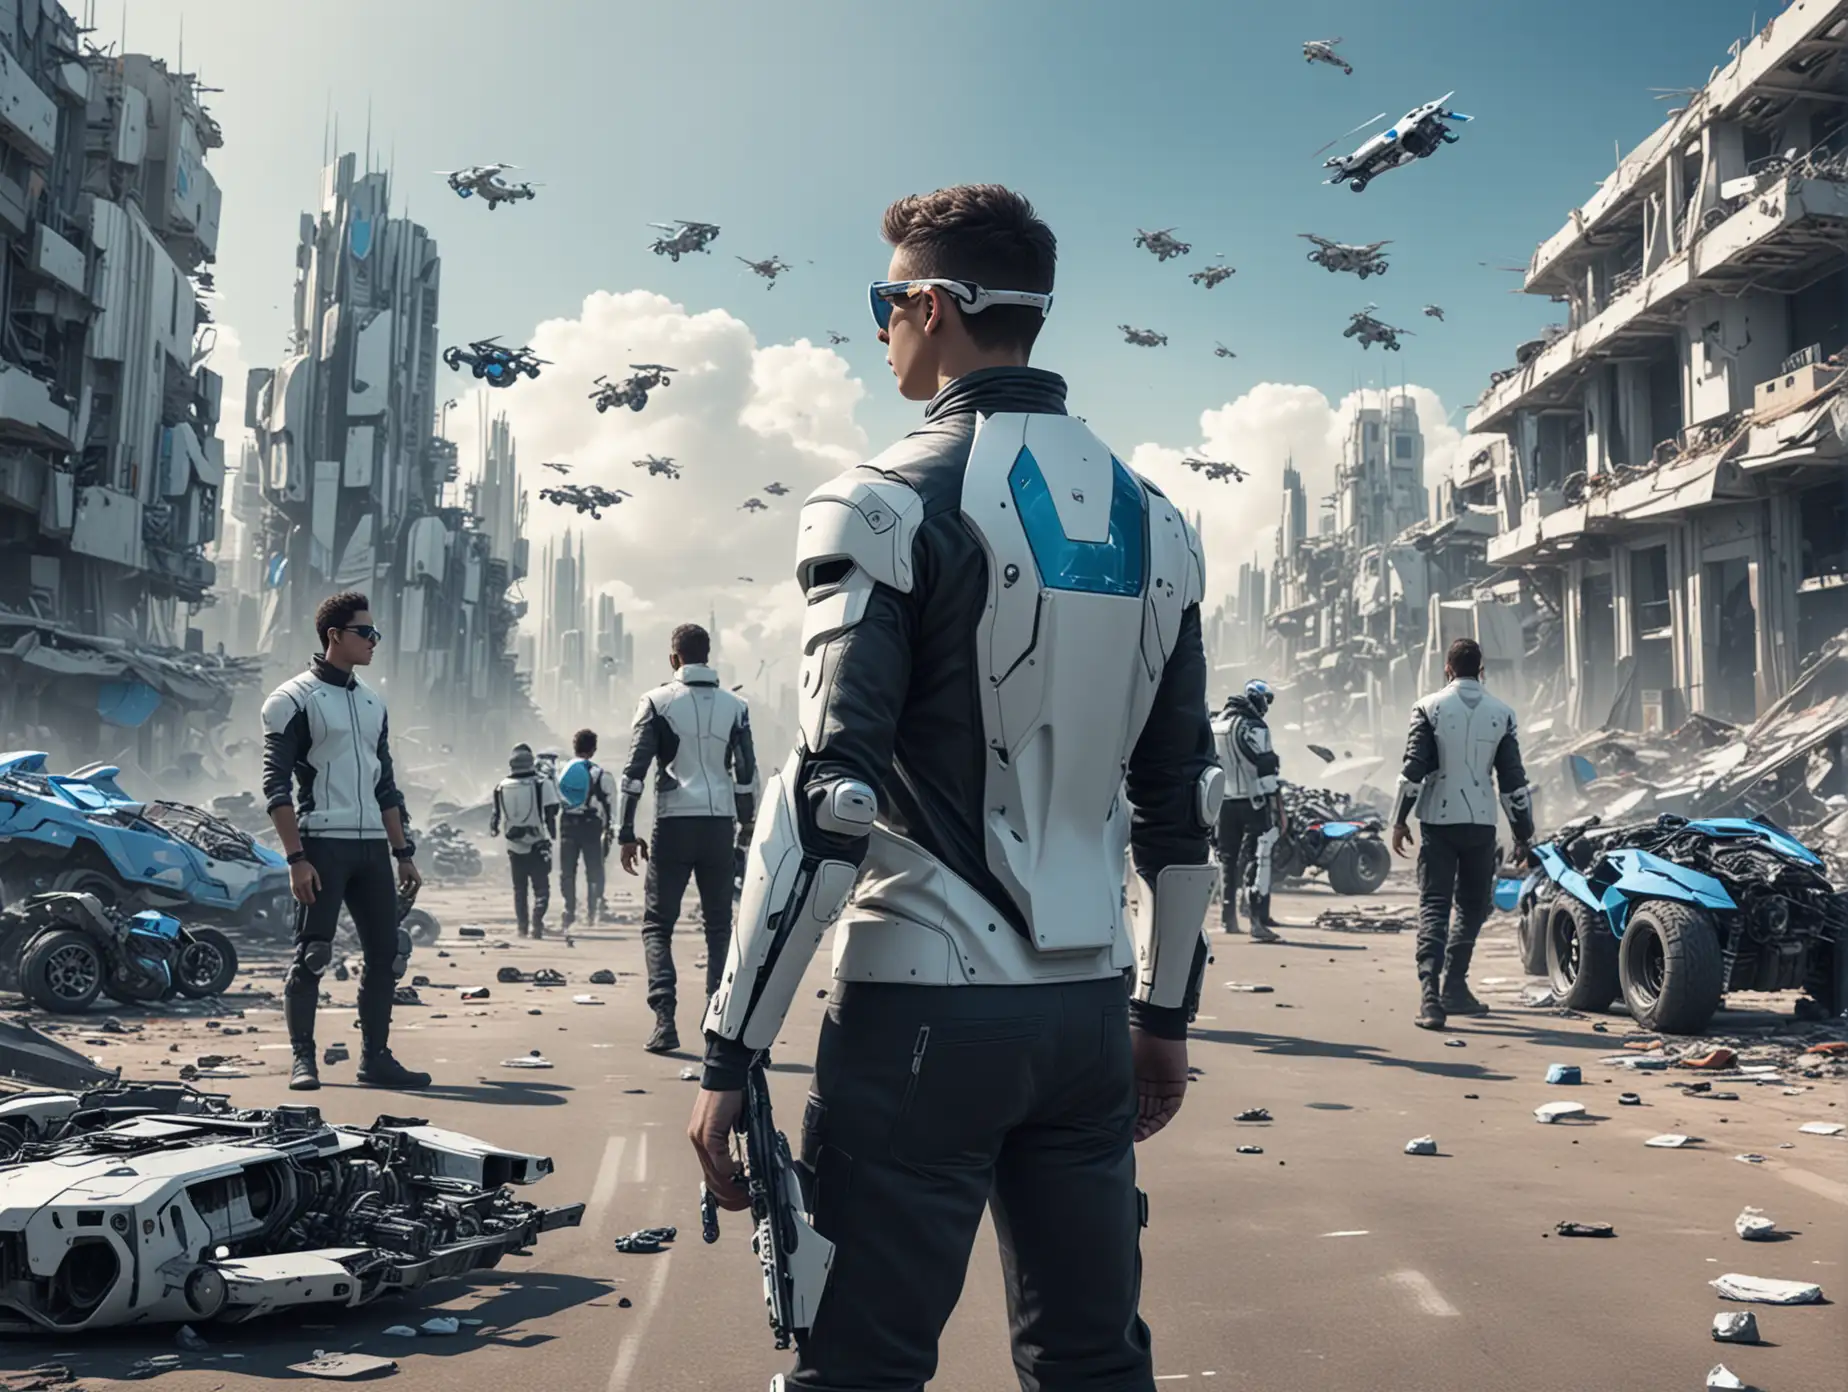 a futuristic group of tech men with cyber mobiles and remote controls in their hands and can be folded down cyber glasses. In the background a hyperfuturistic destroyed blue-white city and many futuristic vehicles like motorbikes, skateboards, spaceships and drones.